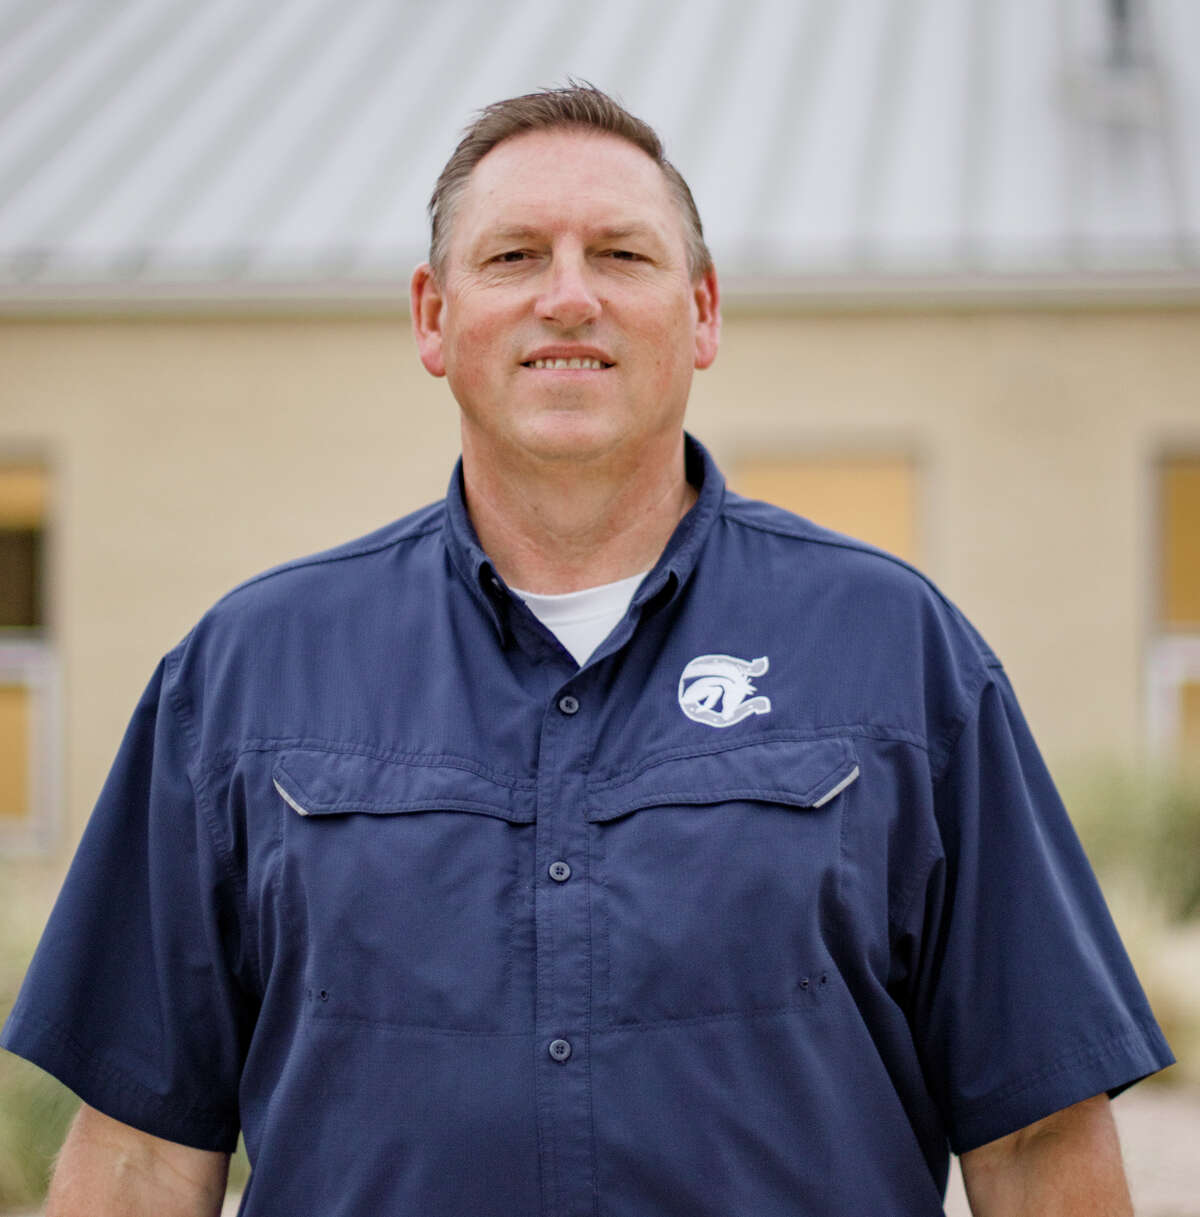 Boerne Champion High School head football coach Keith Kaiser will retire at the end of the school year. His final game as head coach will be on Friday. 